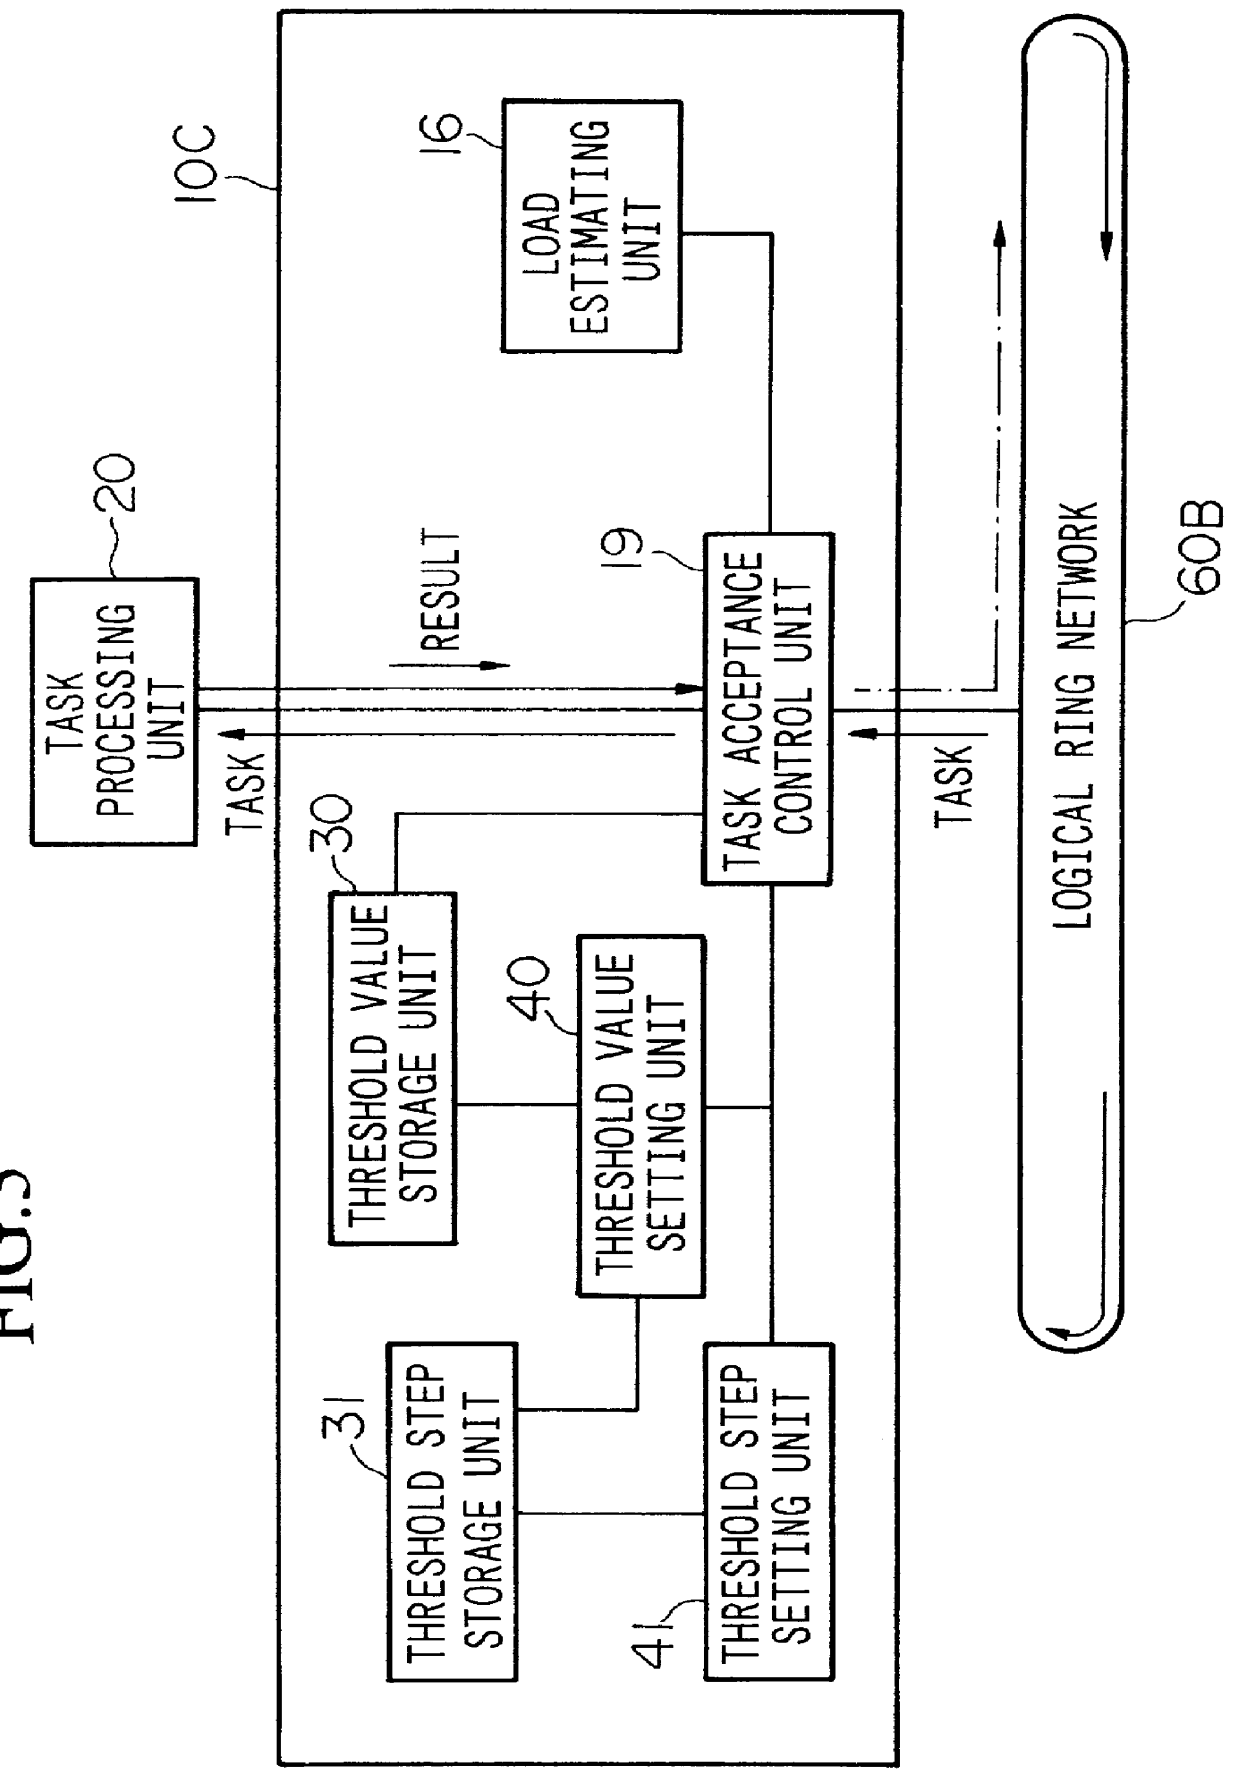 Non-uniform system load balance method and apparatus for updating threshold of tasks according to estimated load fluctuation